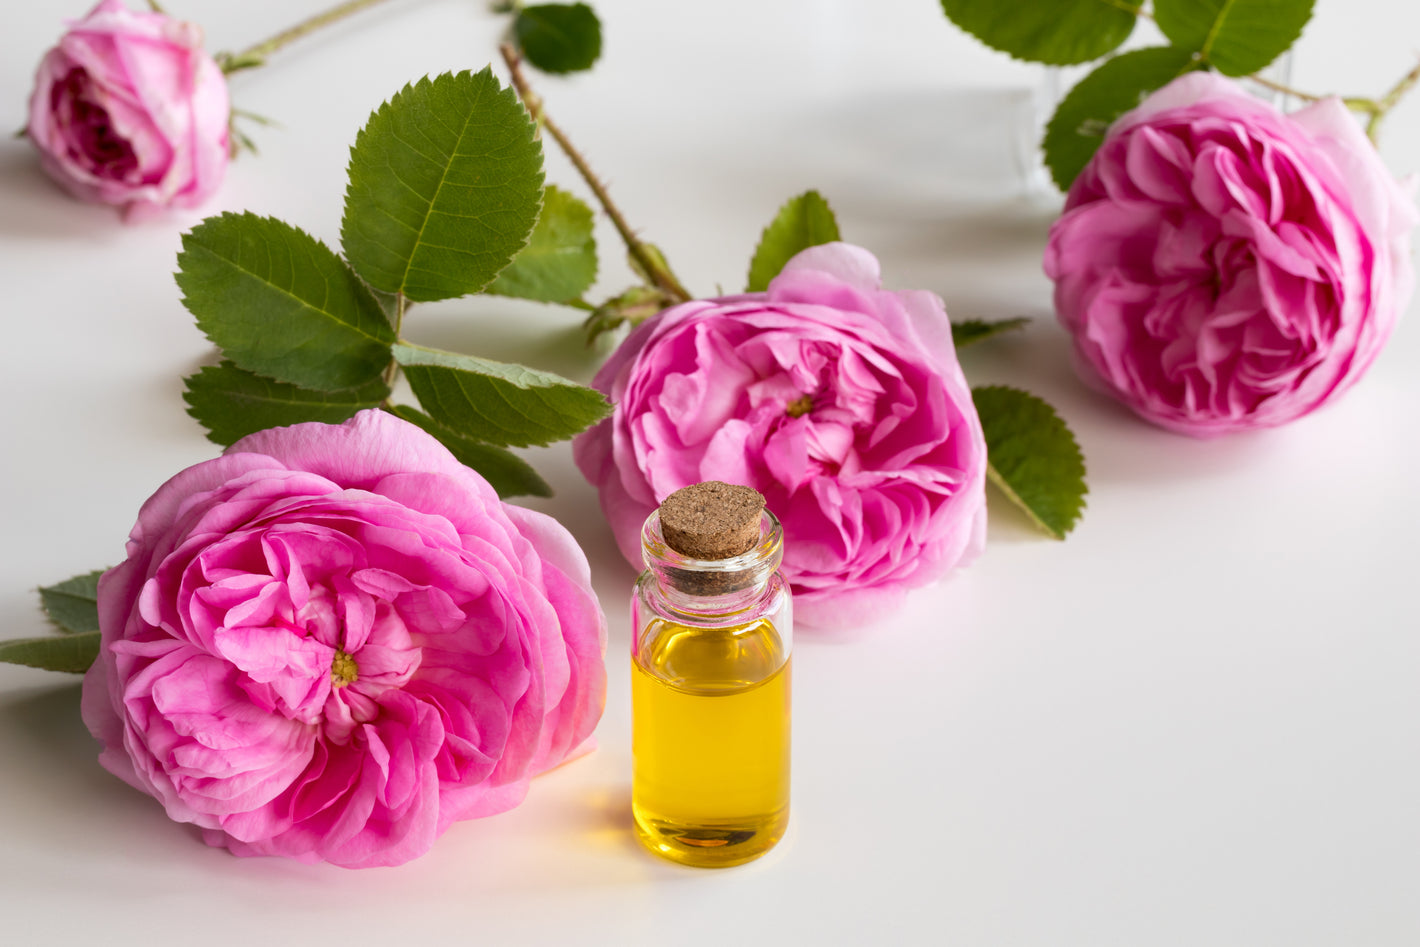 Rose Absolute face tonic ingredient - rose essential oil